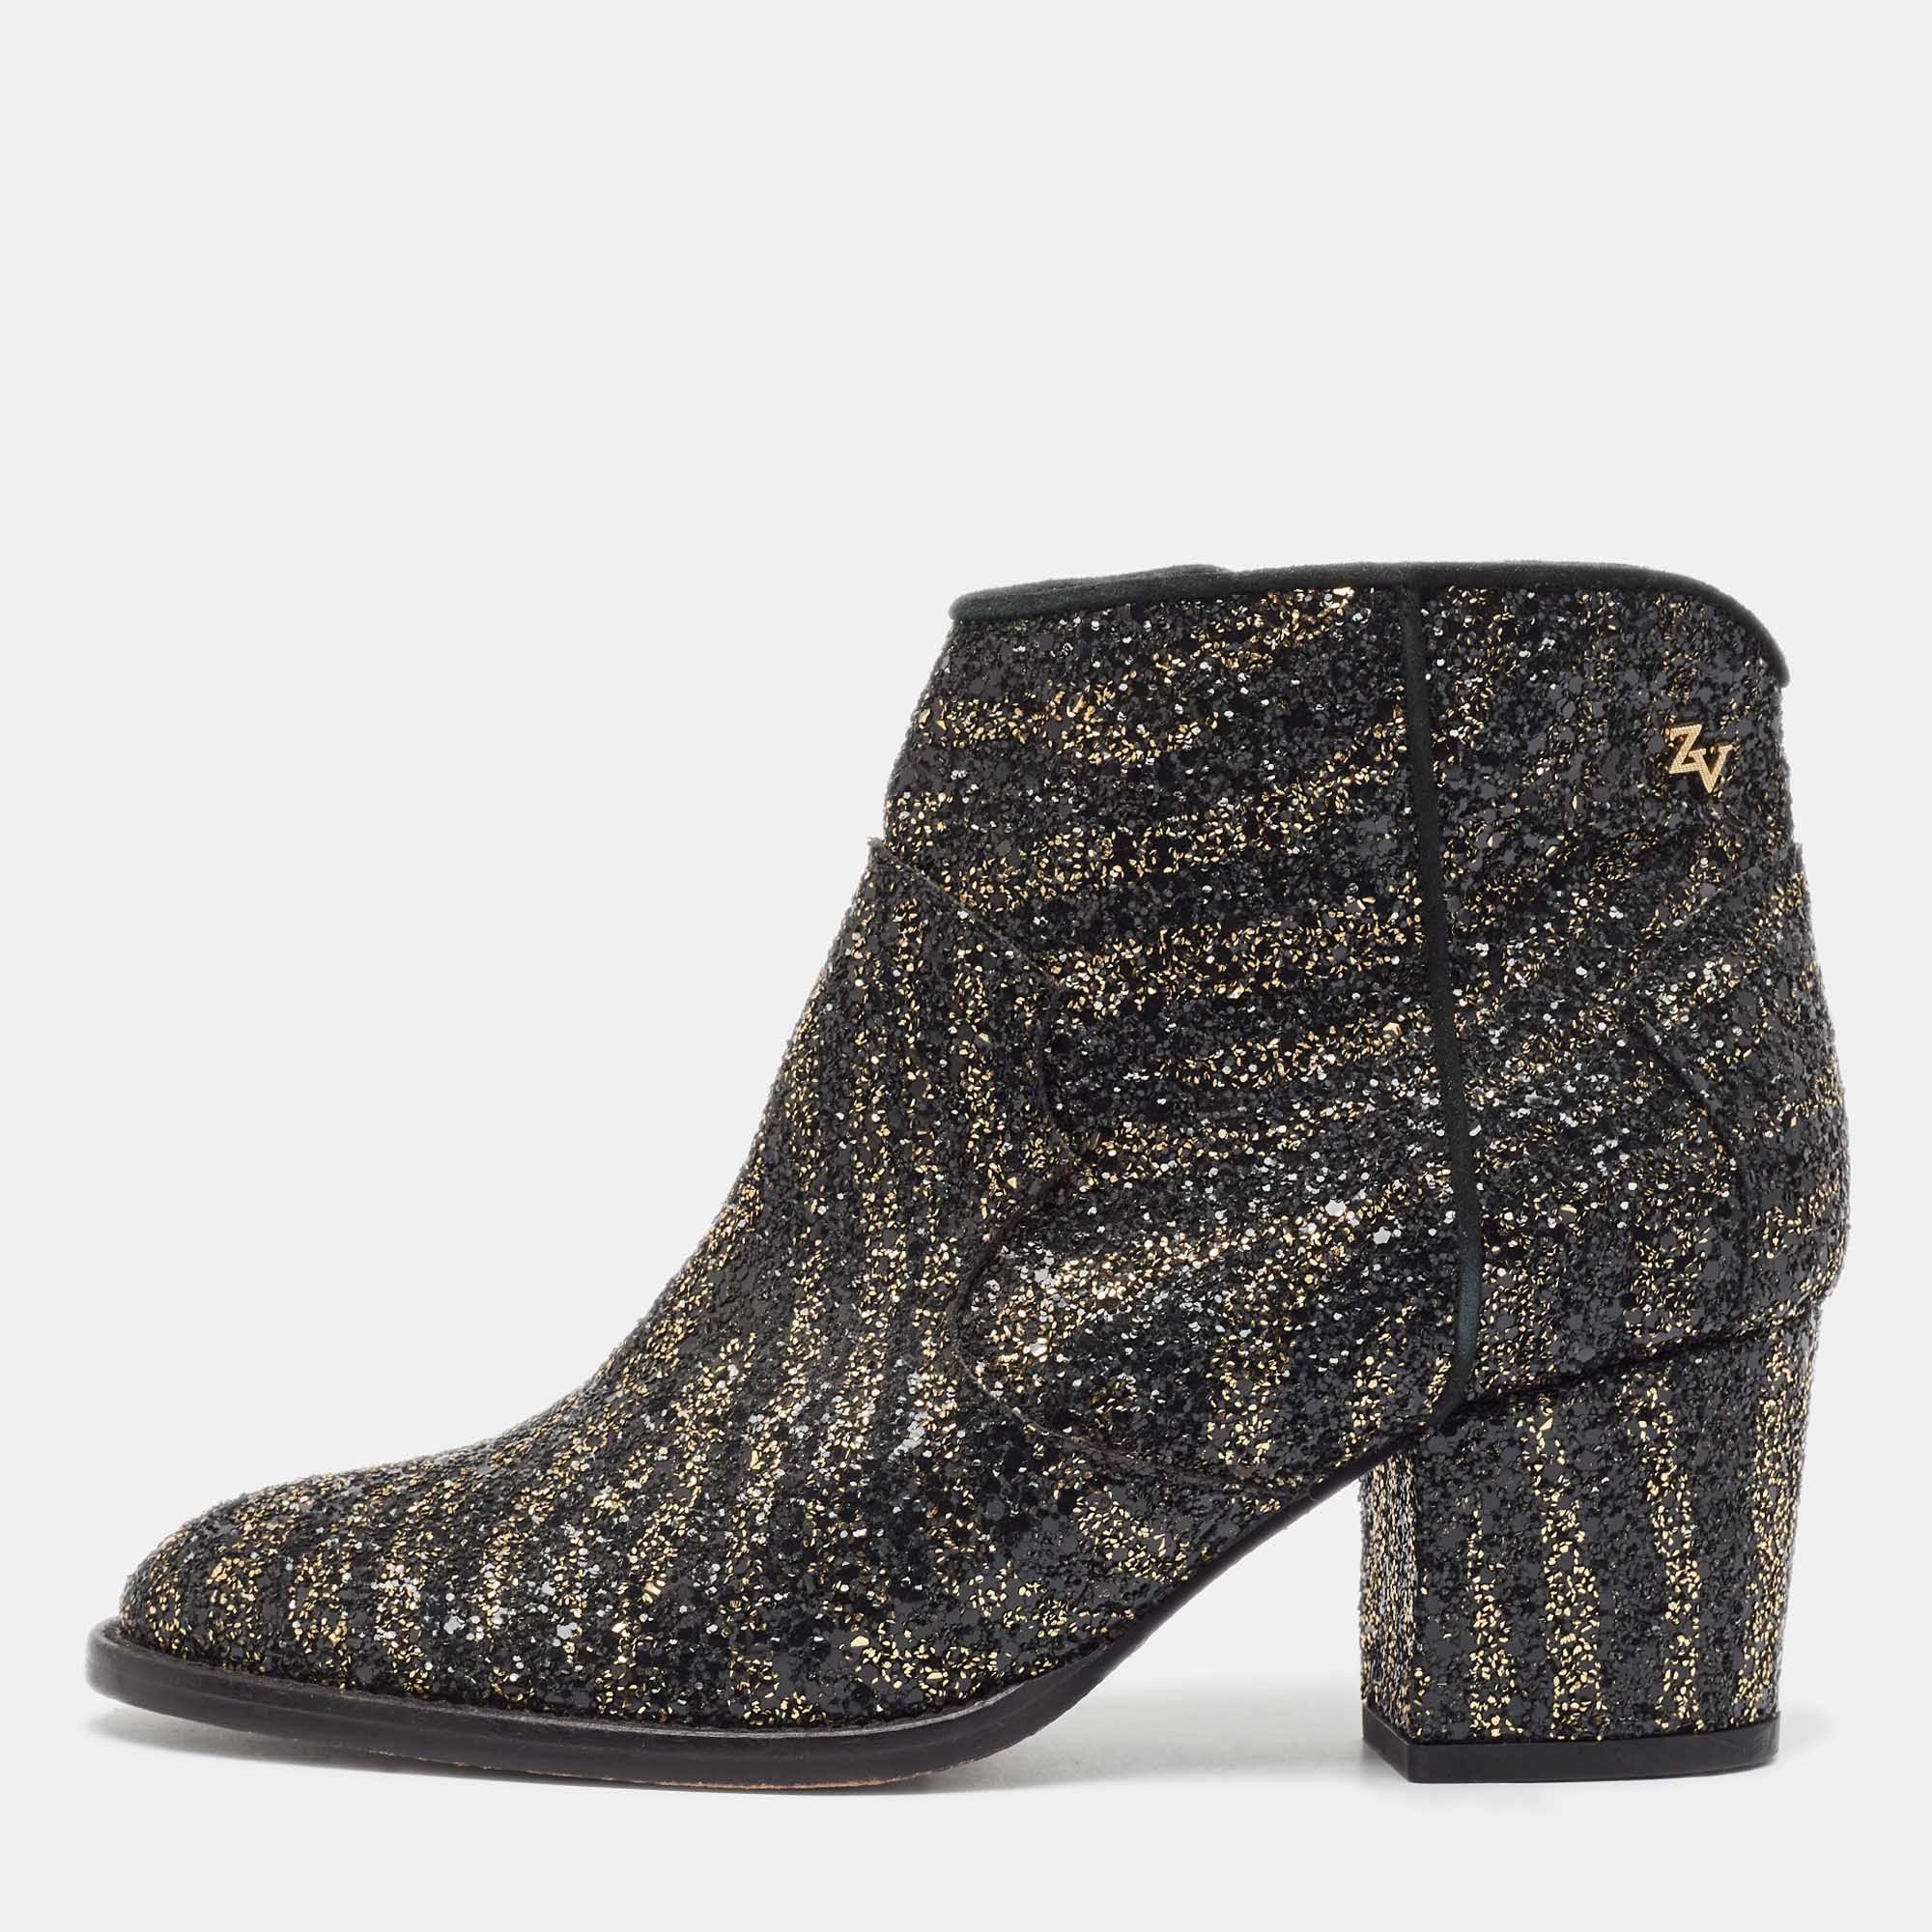 Zadig & voltaire black/gold glitter molly ankle boots size 36